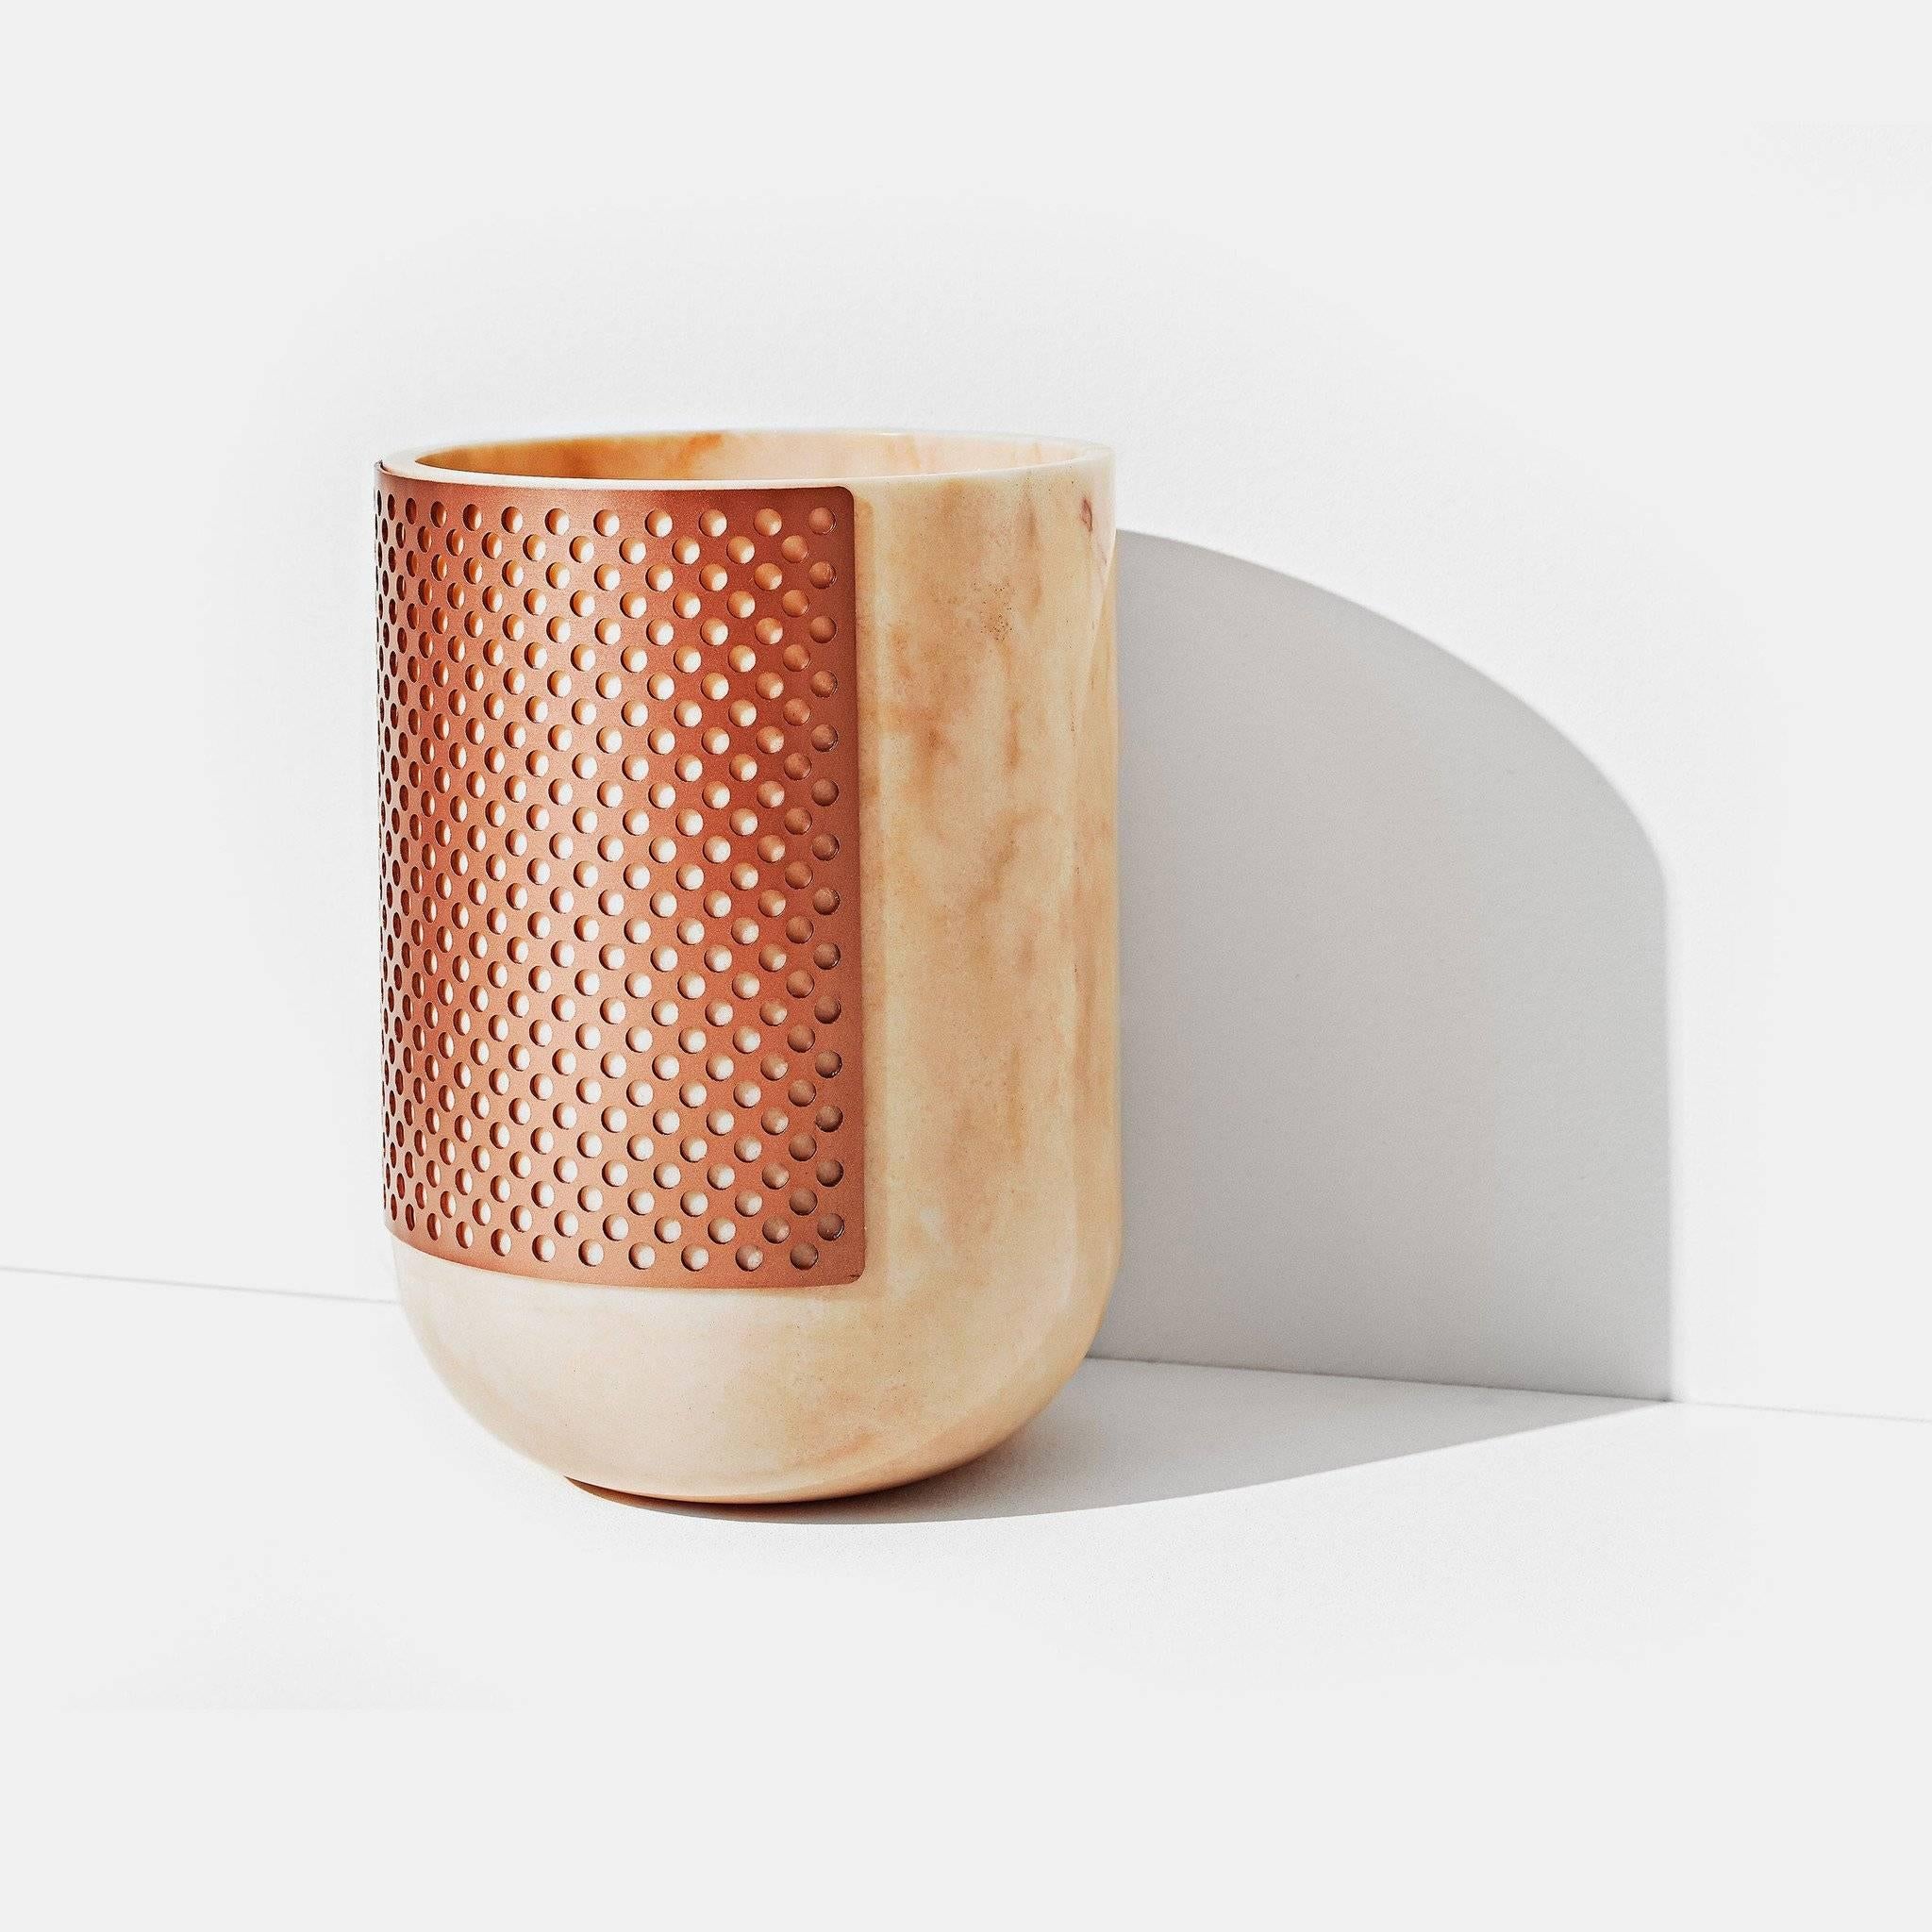 Rabbet is a vase in solid marble with soft and linear shapes partially covered by the perforated copper coloured metal sheath.

Materials: 
Bianco Lasa Covelano marble and copper metal grid

or 

Rosa Portogallo marble and copper coloured metal